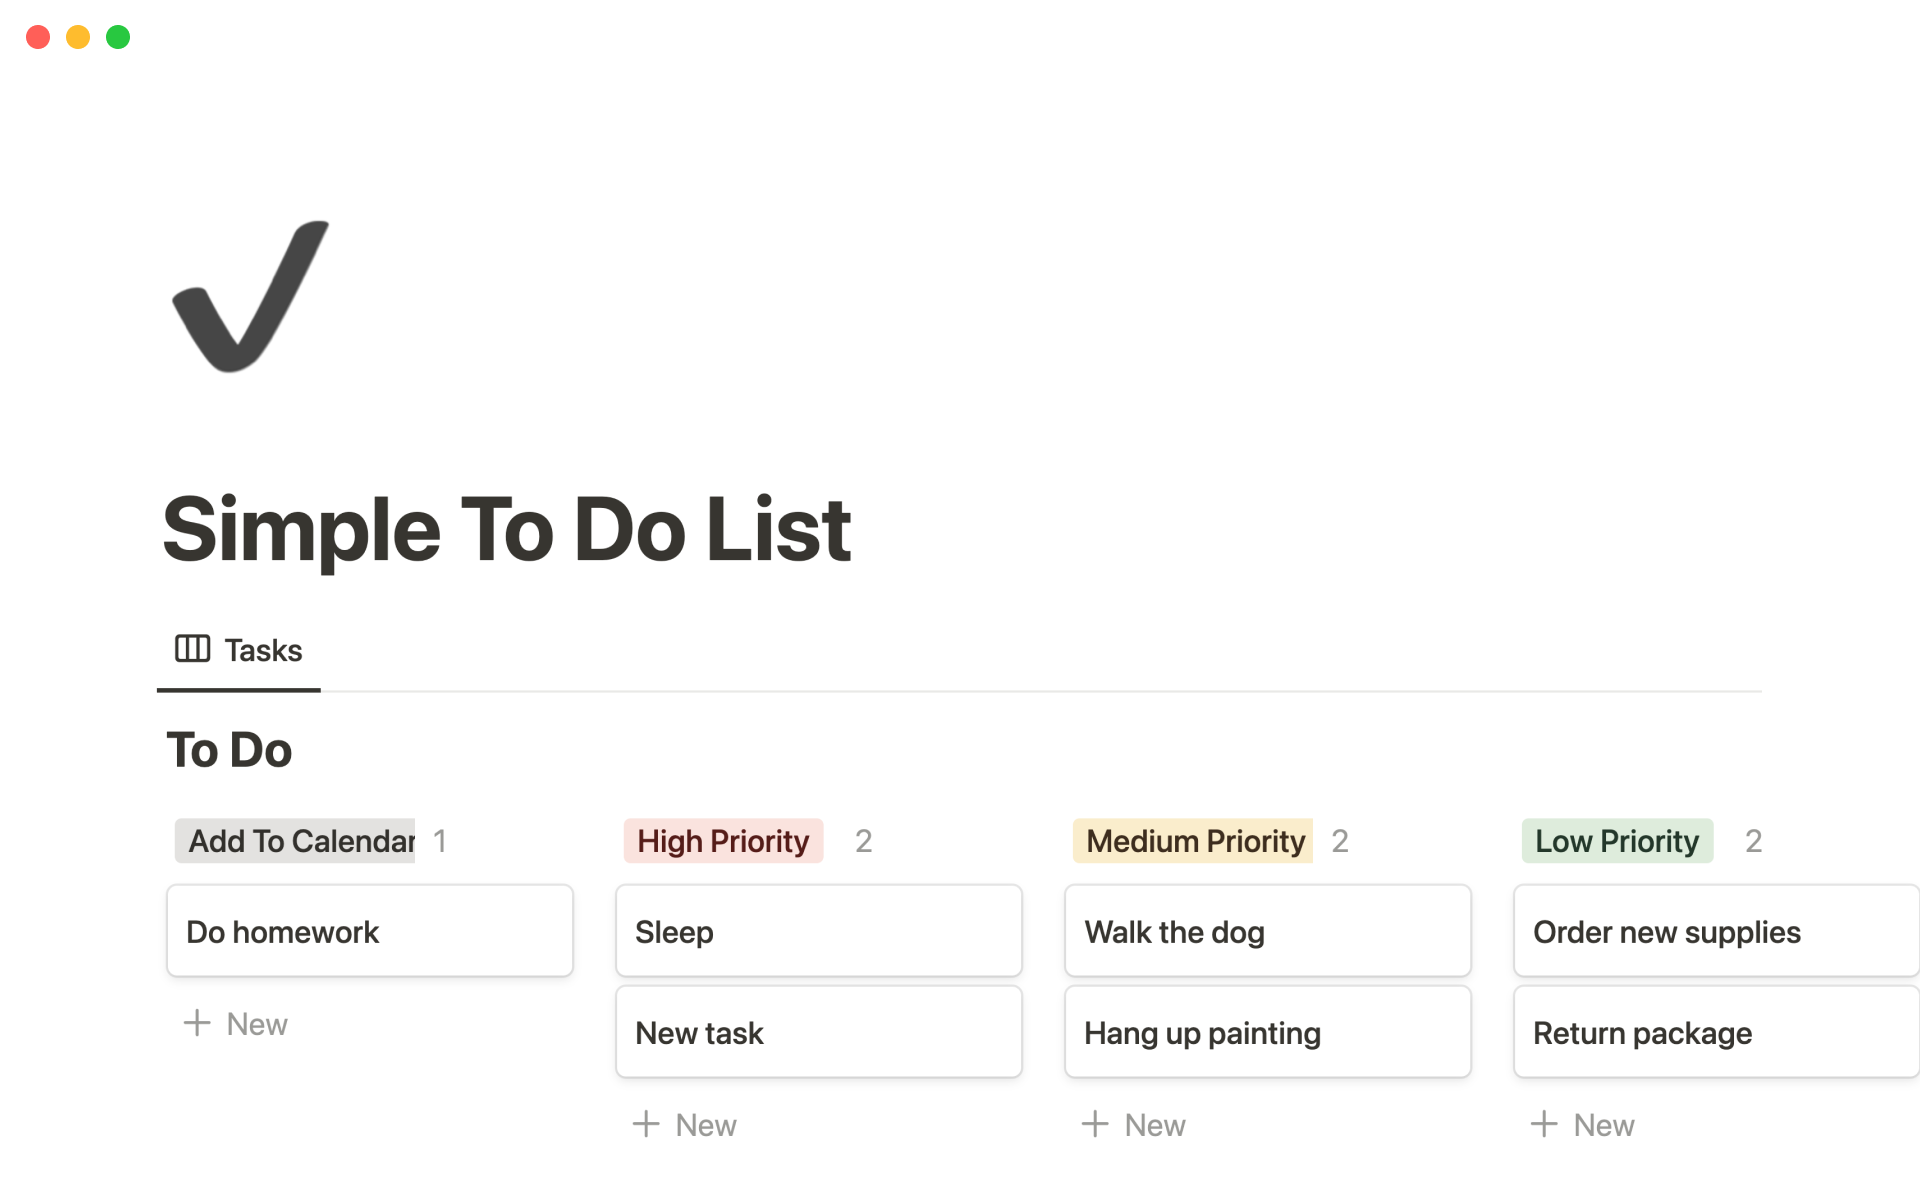 Prioritize your tasks and simplify your to-do list through Notion